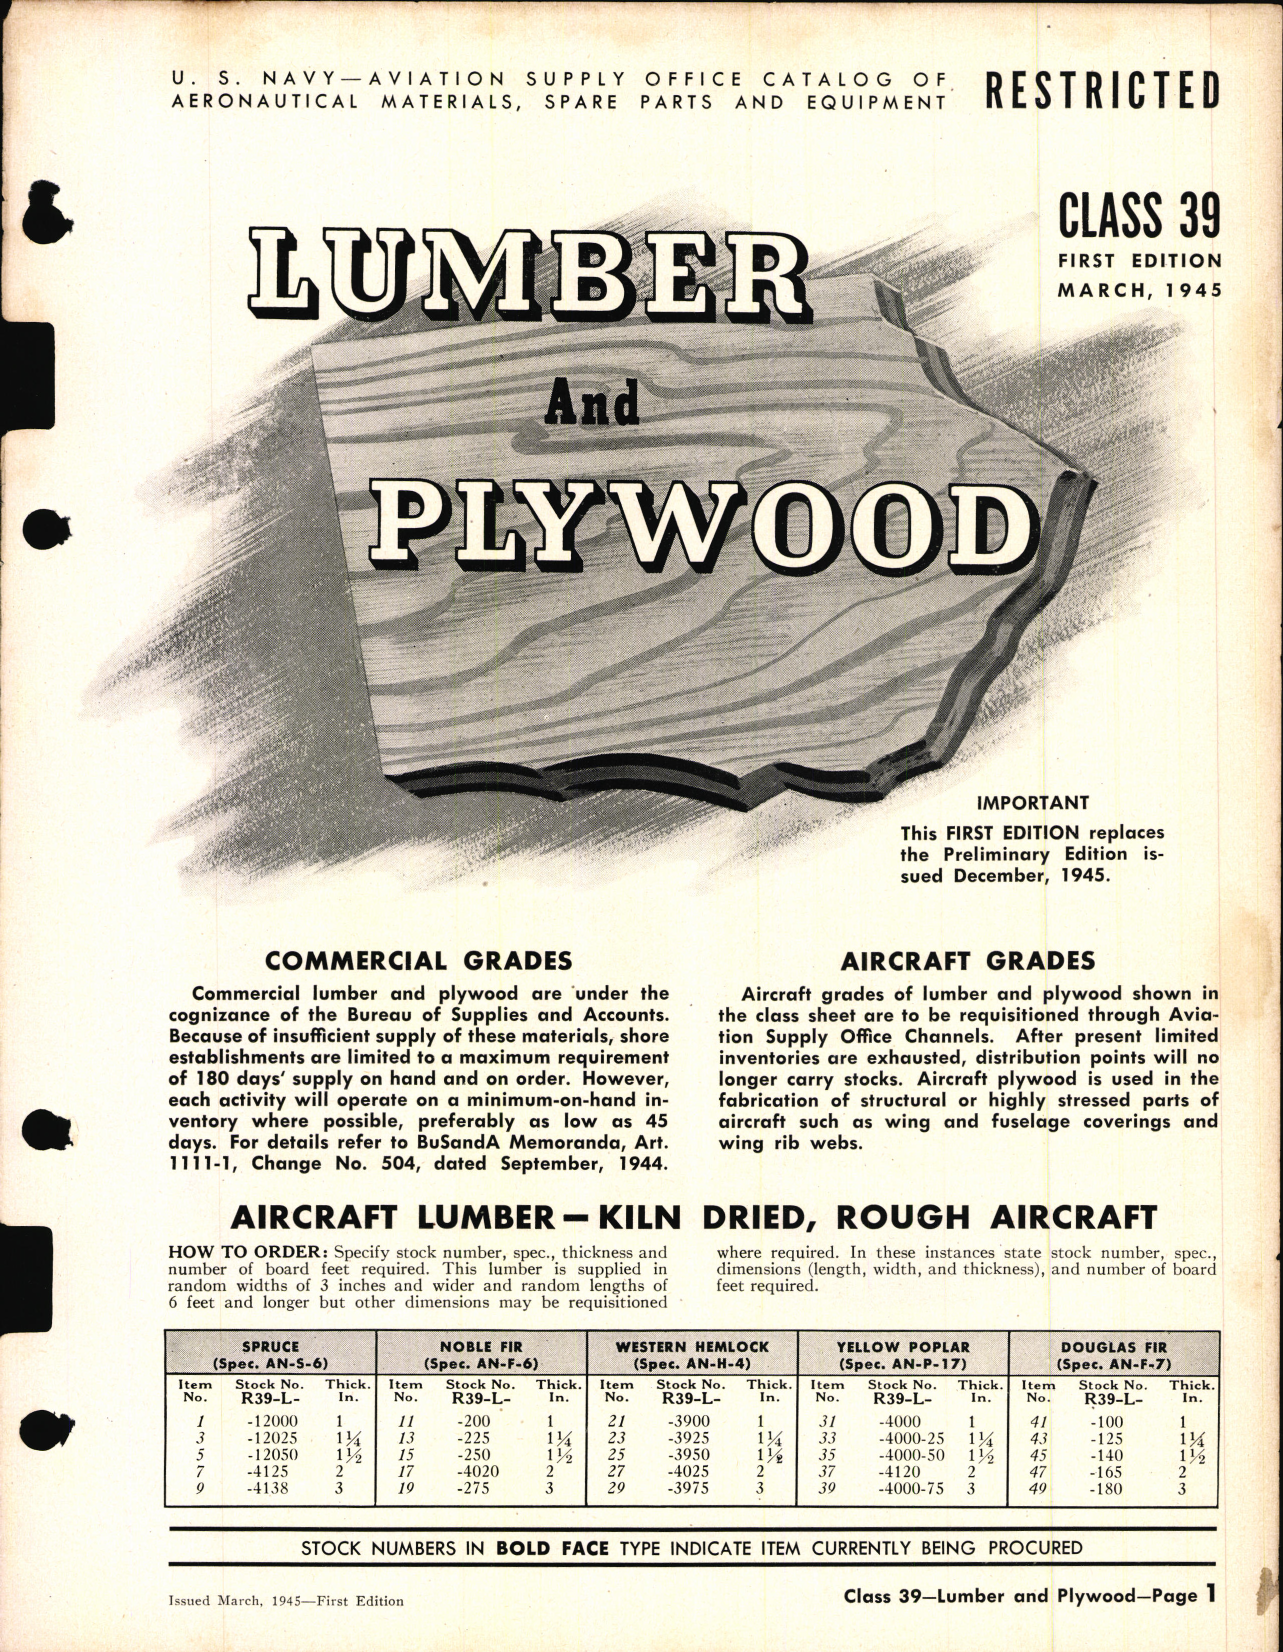 Sample page 1 from AirCorps Library document: Lumber and Plywood